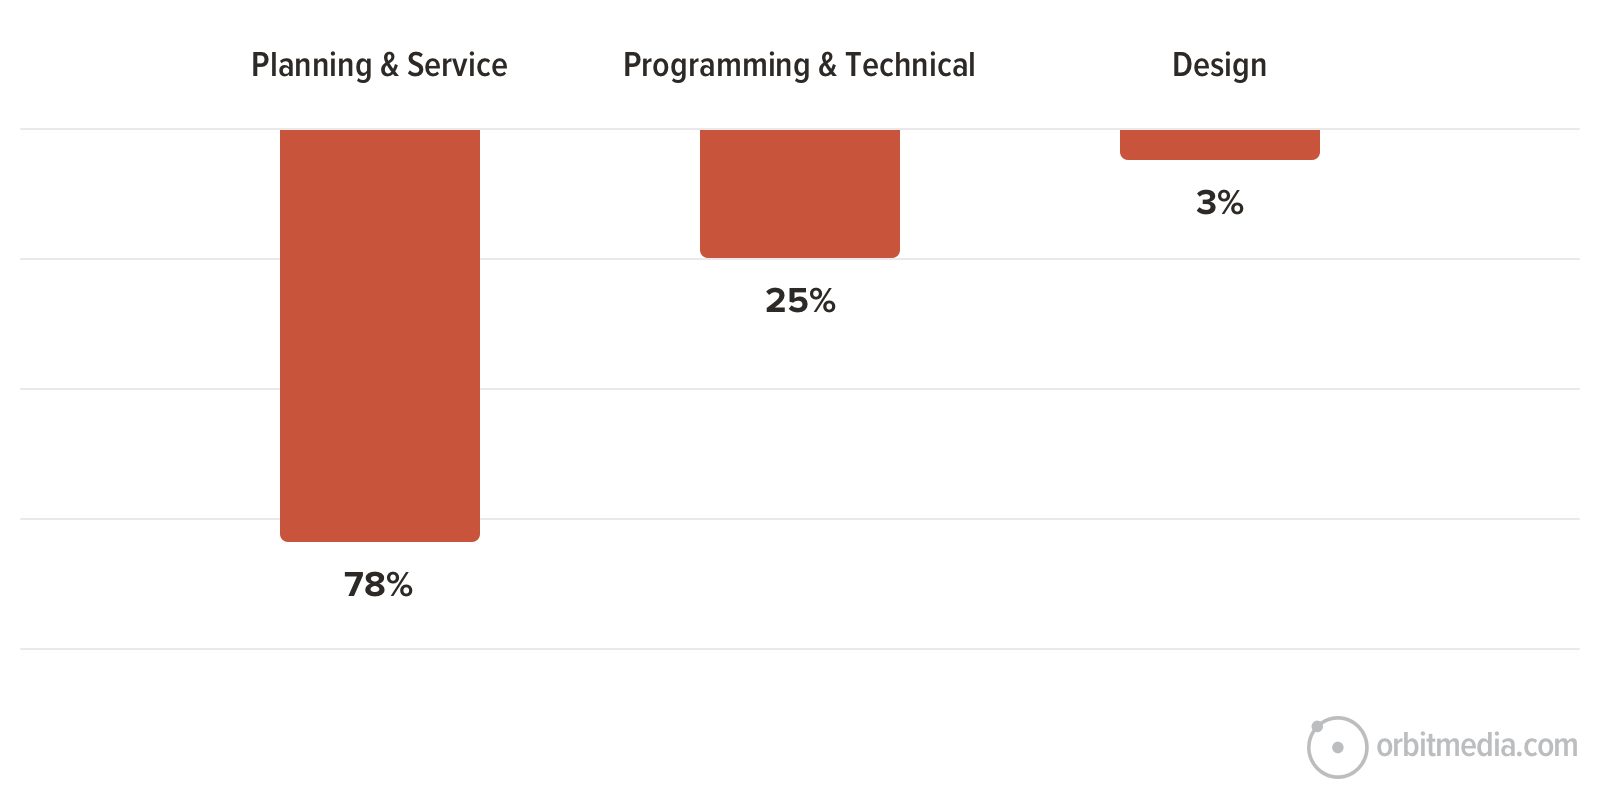 Bar chart showing resource allocation: planning & service at 78%, programming & technical at 25%, and design at 3%.